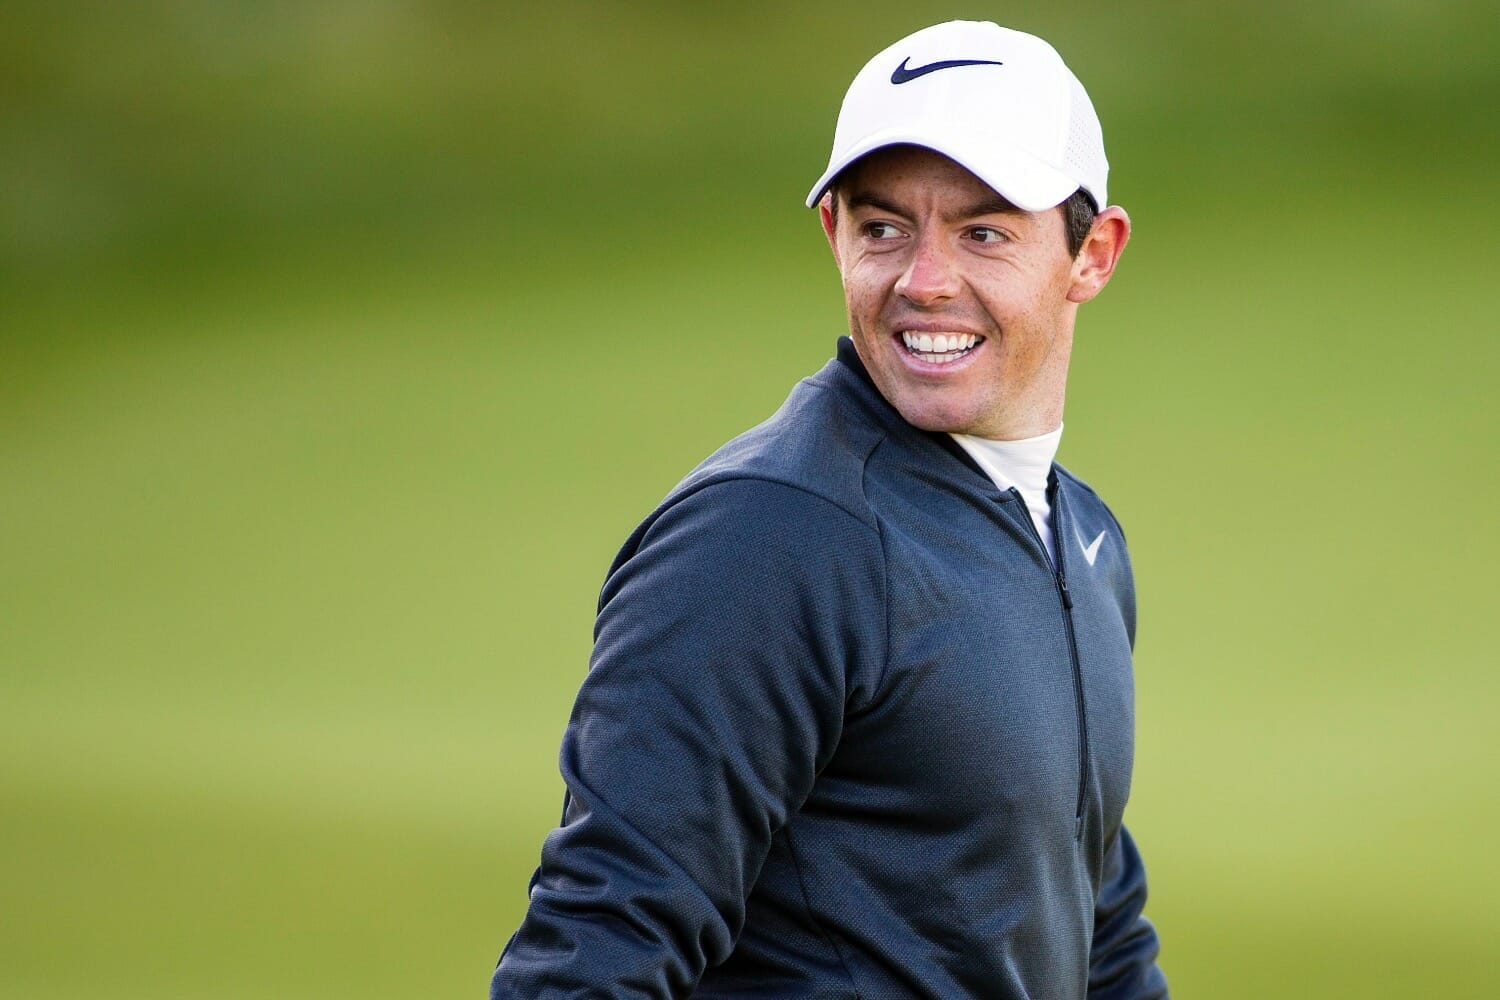 McIlroy finds competitive comfort in his second home